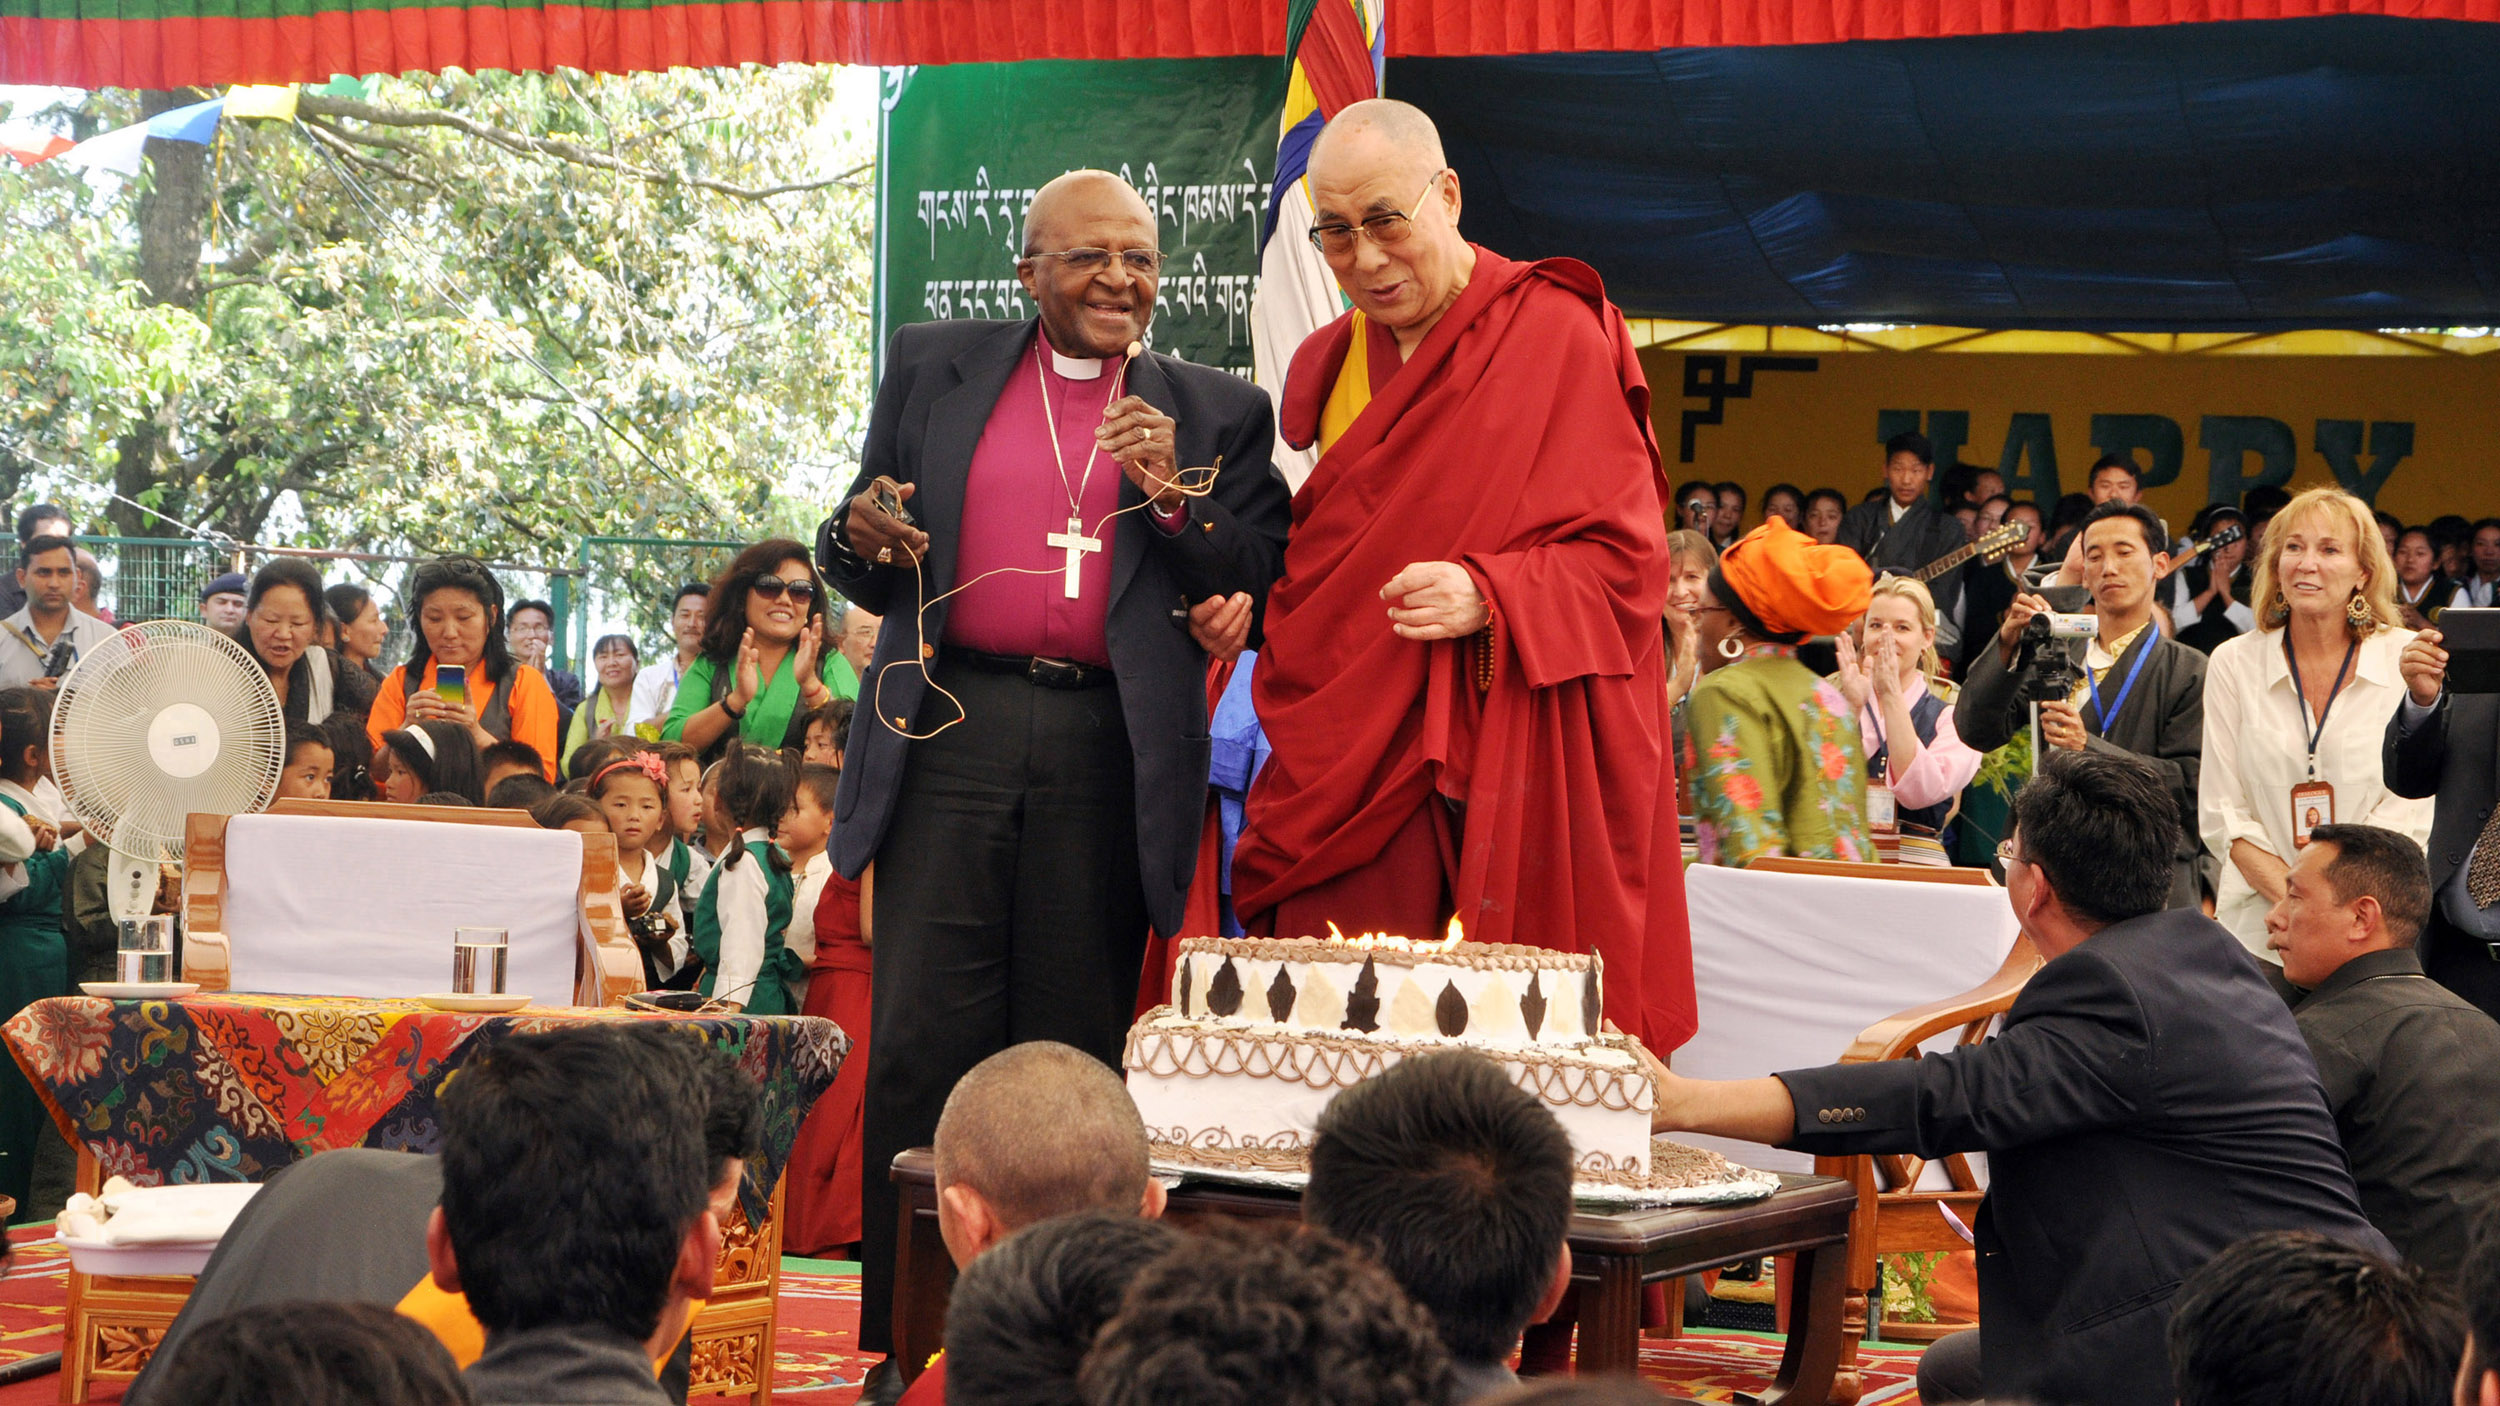 Spiritual leader Dalai Lama to blow out candles on his birthday cake as retired Archbishop Desmond Tutu looks on at the Tibetan Childrens Village School in Dharmsala, India, on April 23, 2015. (Hindustan Times via Getty Images)